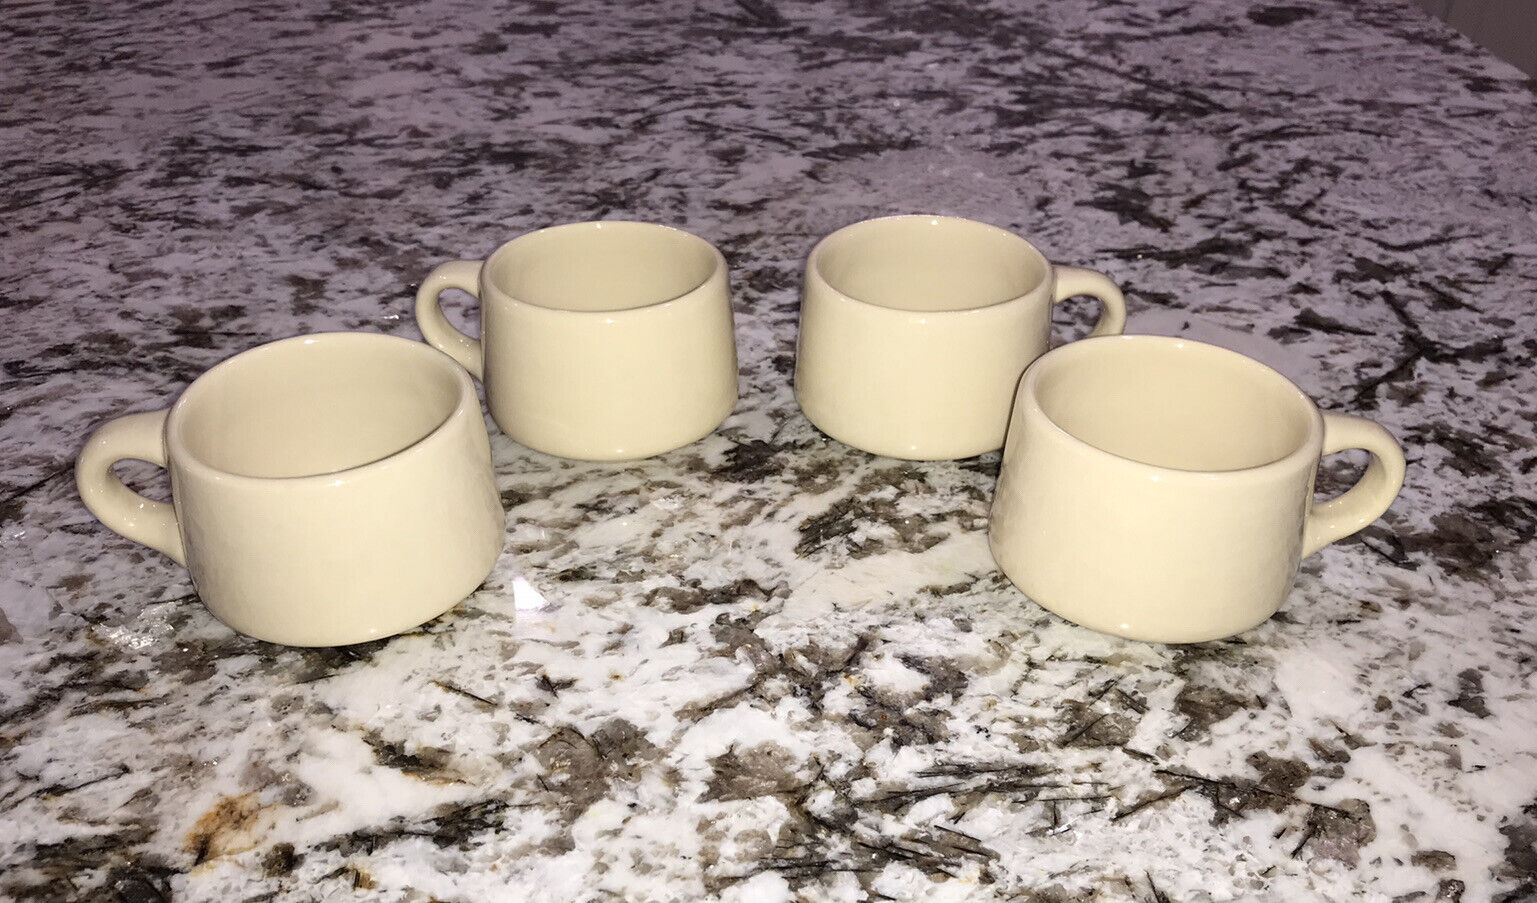 CARIBE PUERTO RICO USA VTG MID CENTURY LOT OF 4 DINER CAFE’ COFFEE CUPS VGUC